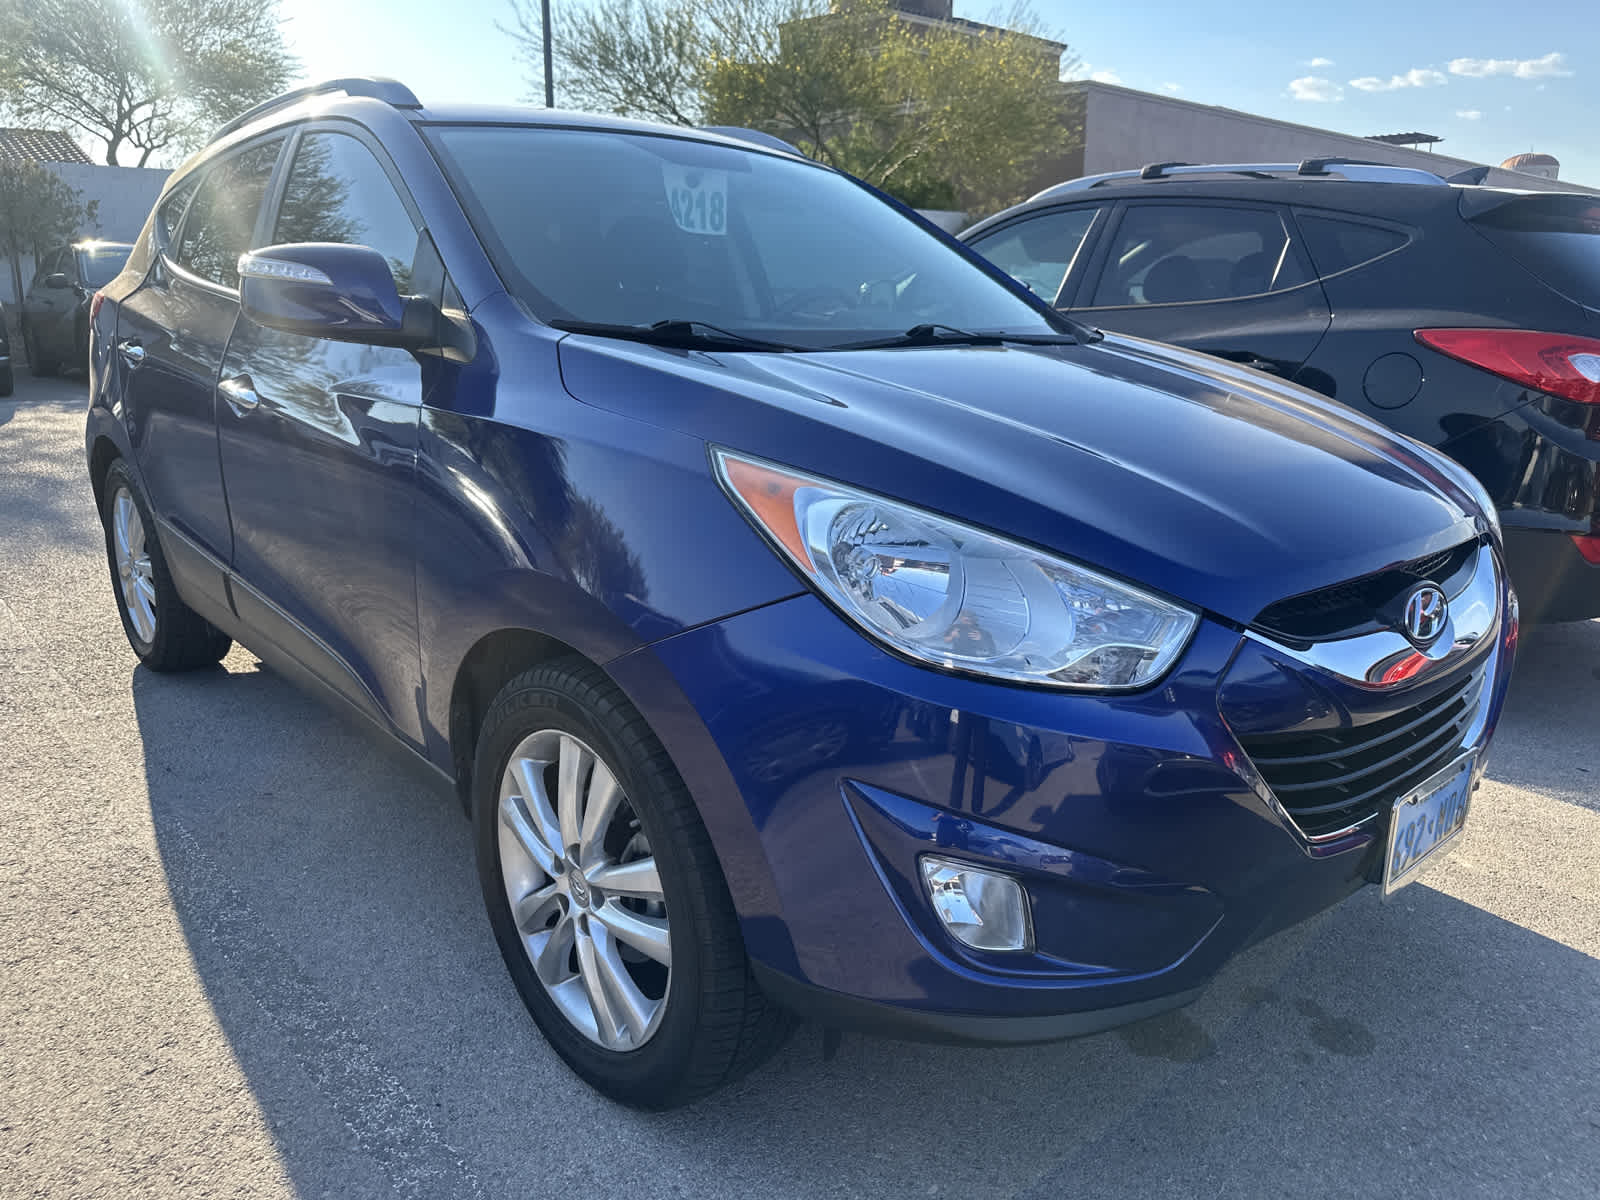 Used 2011 Hyundai Tucson Limited with VIN KM8JU3AC9BU297733 for sale in Las Vegas, NV